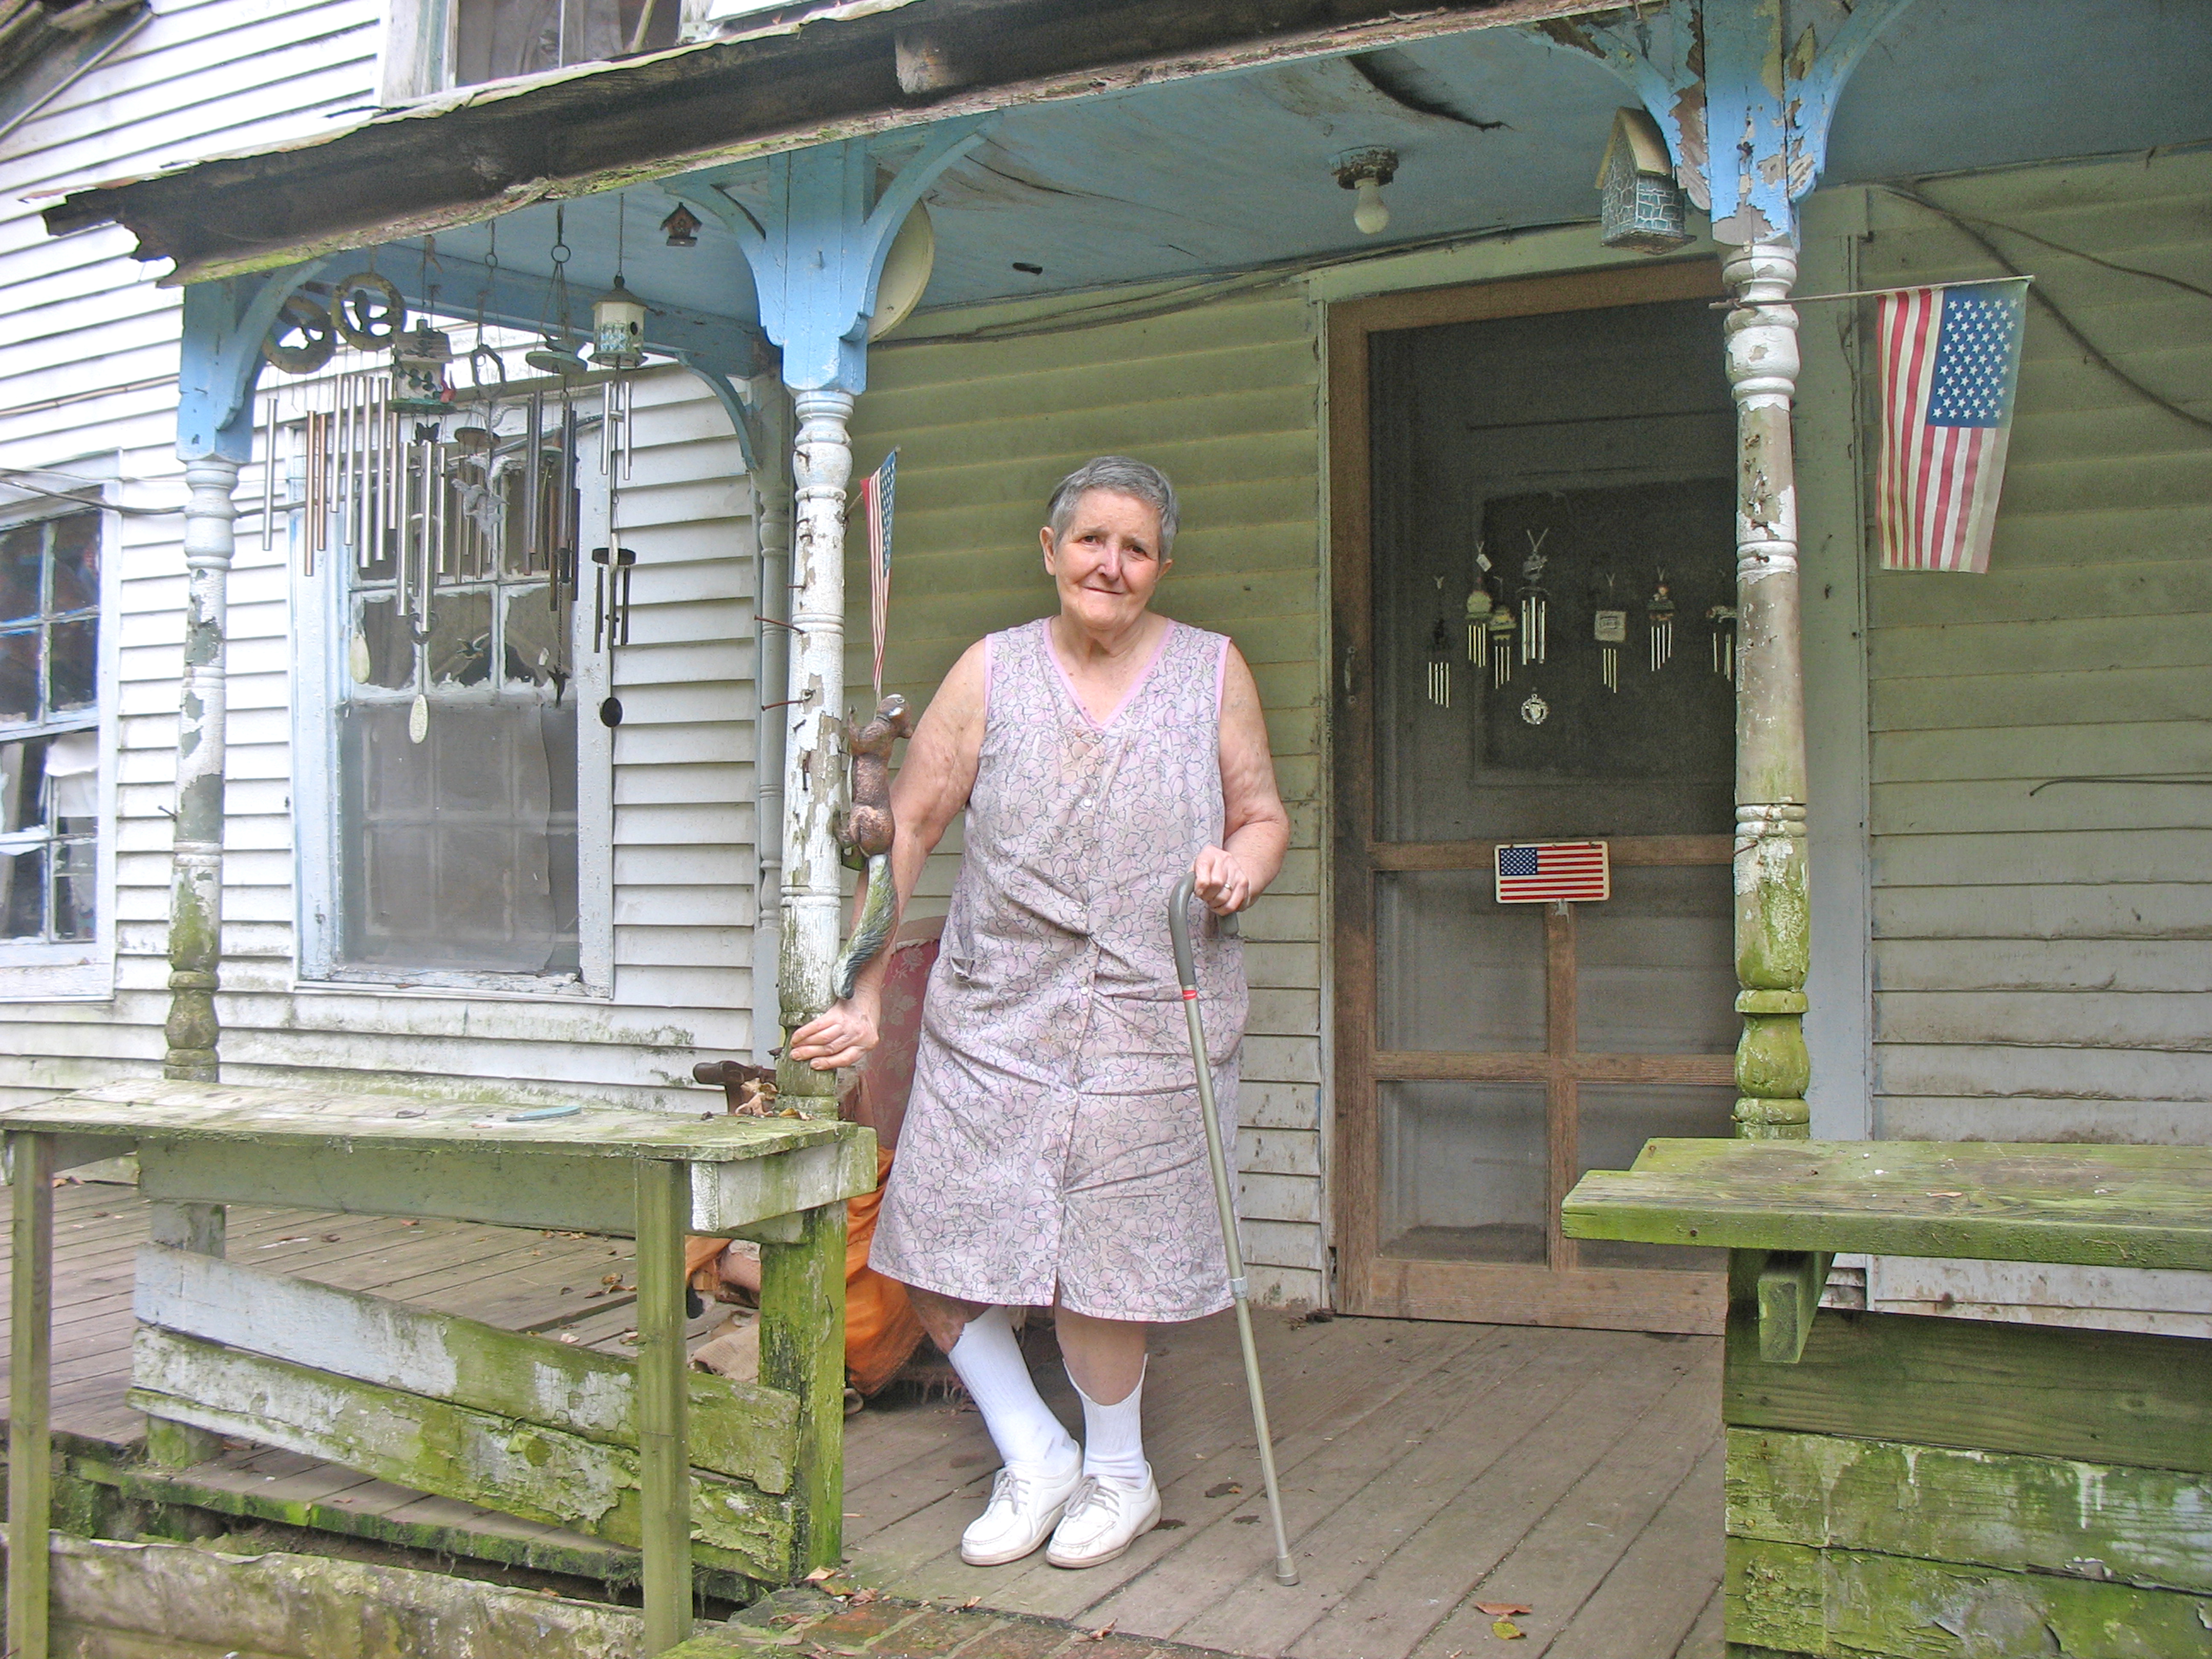 Elderly woman with a cane standing on the front porch of a house